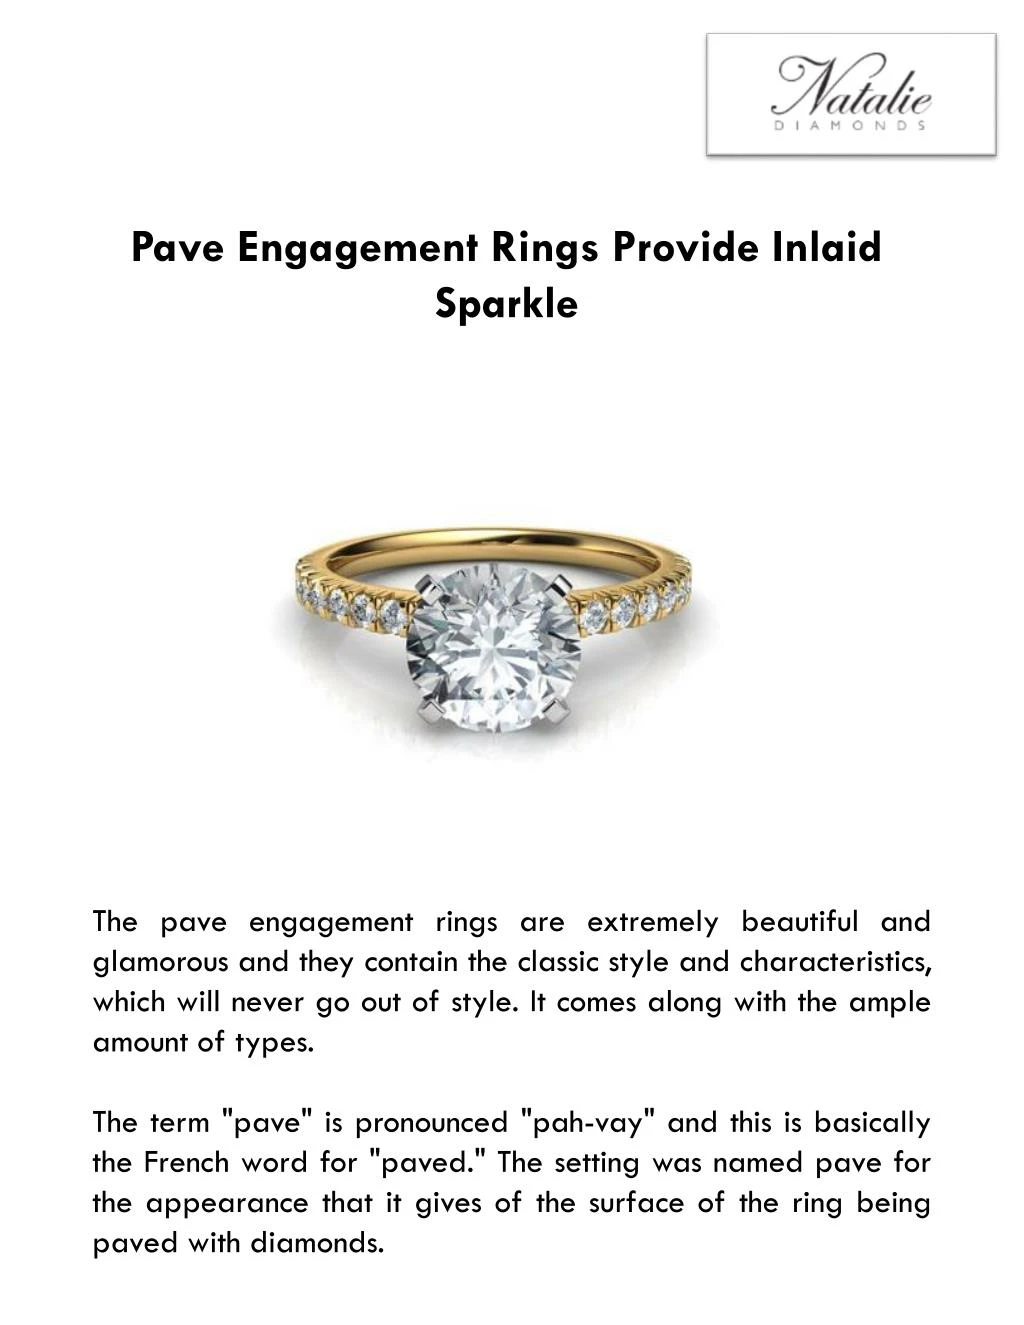 pave engagement rings provide inlaid sparkle